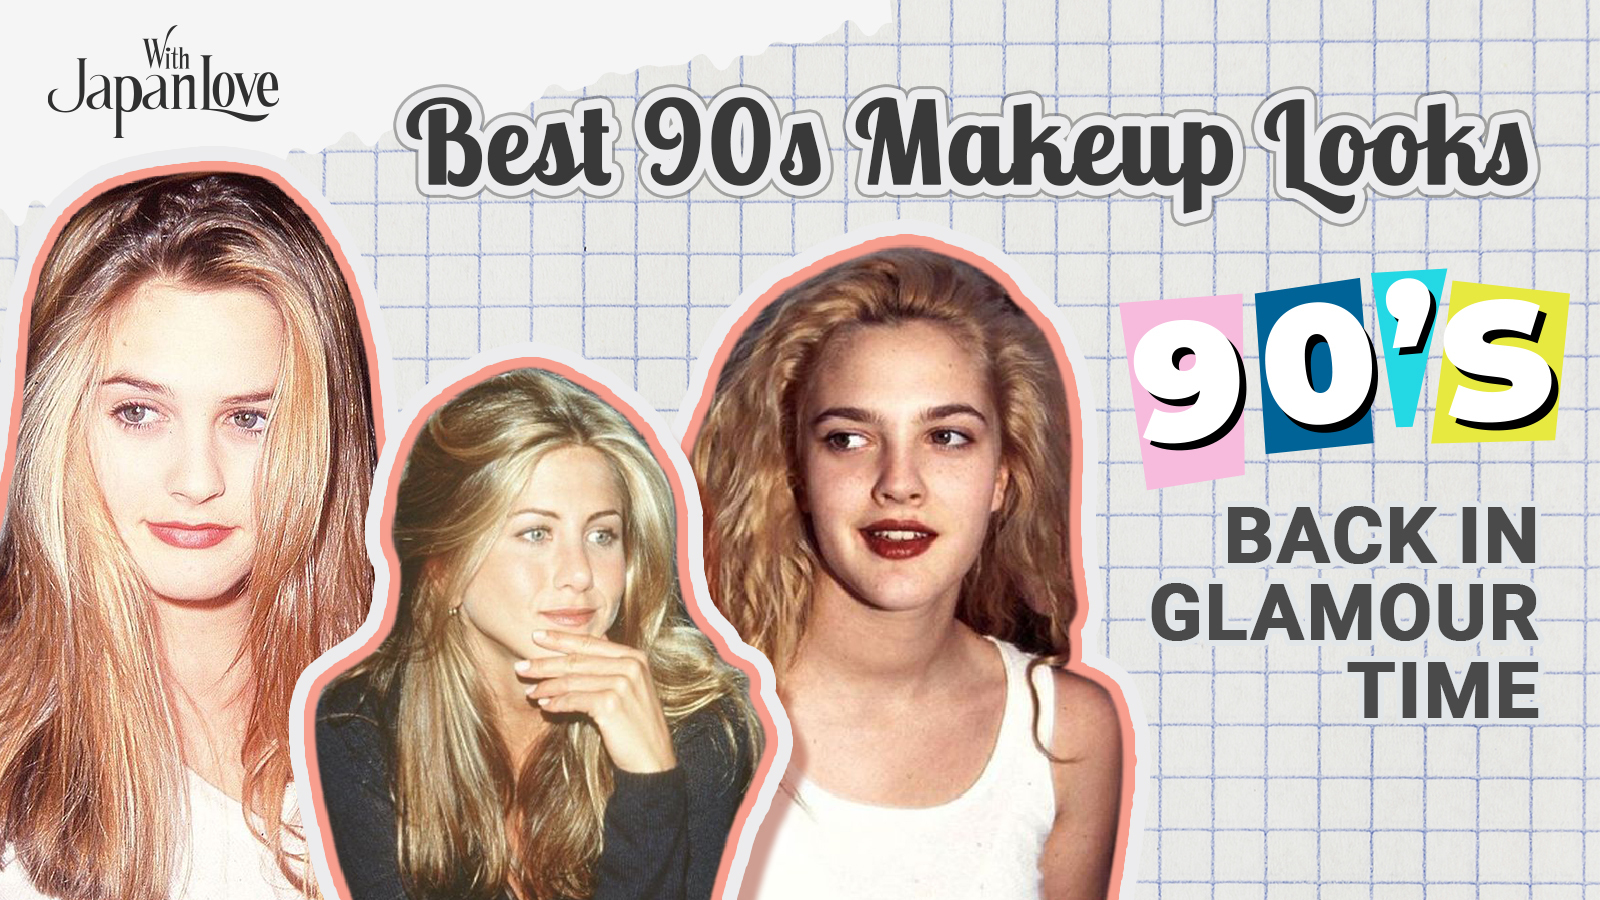 Hair gems are your favourite 90s trend brought into 2016